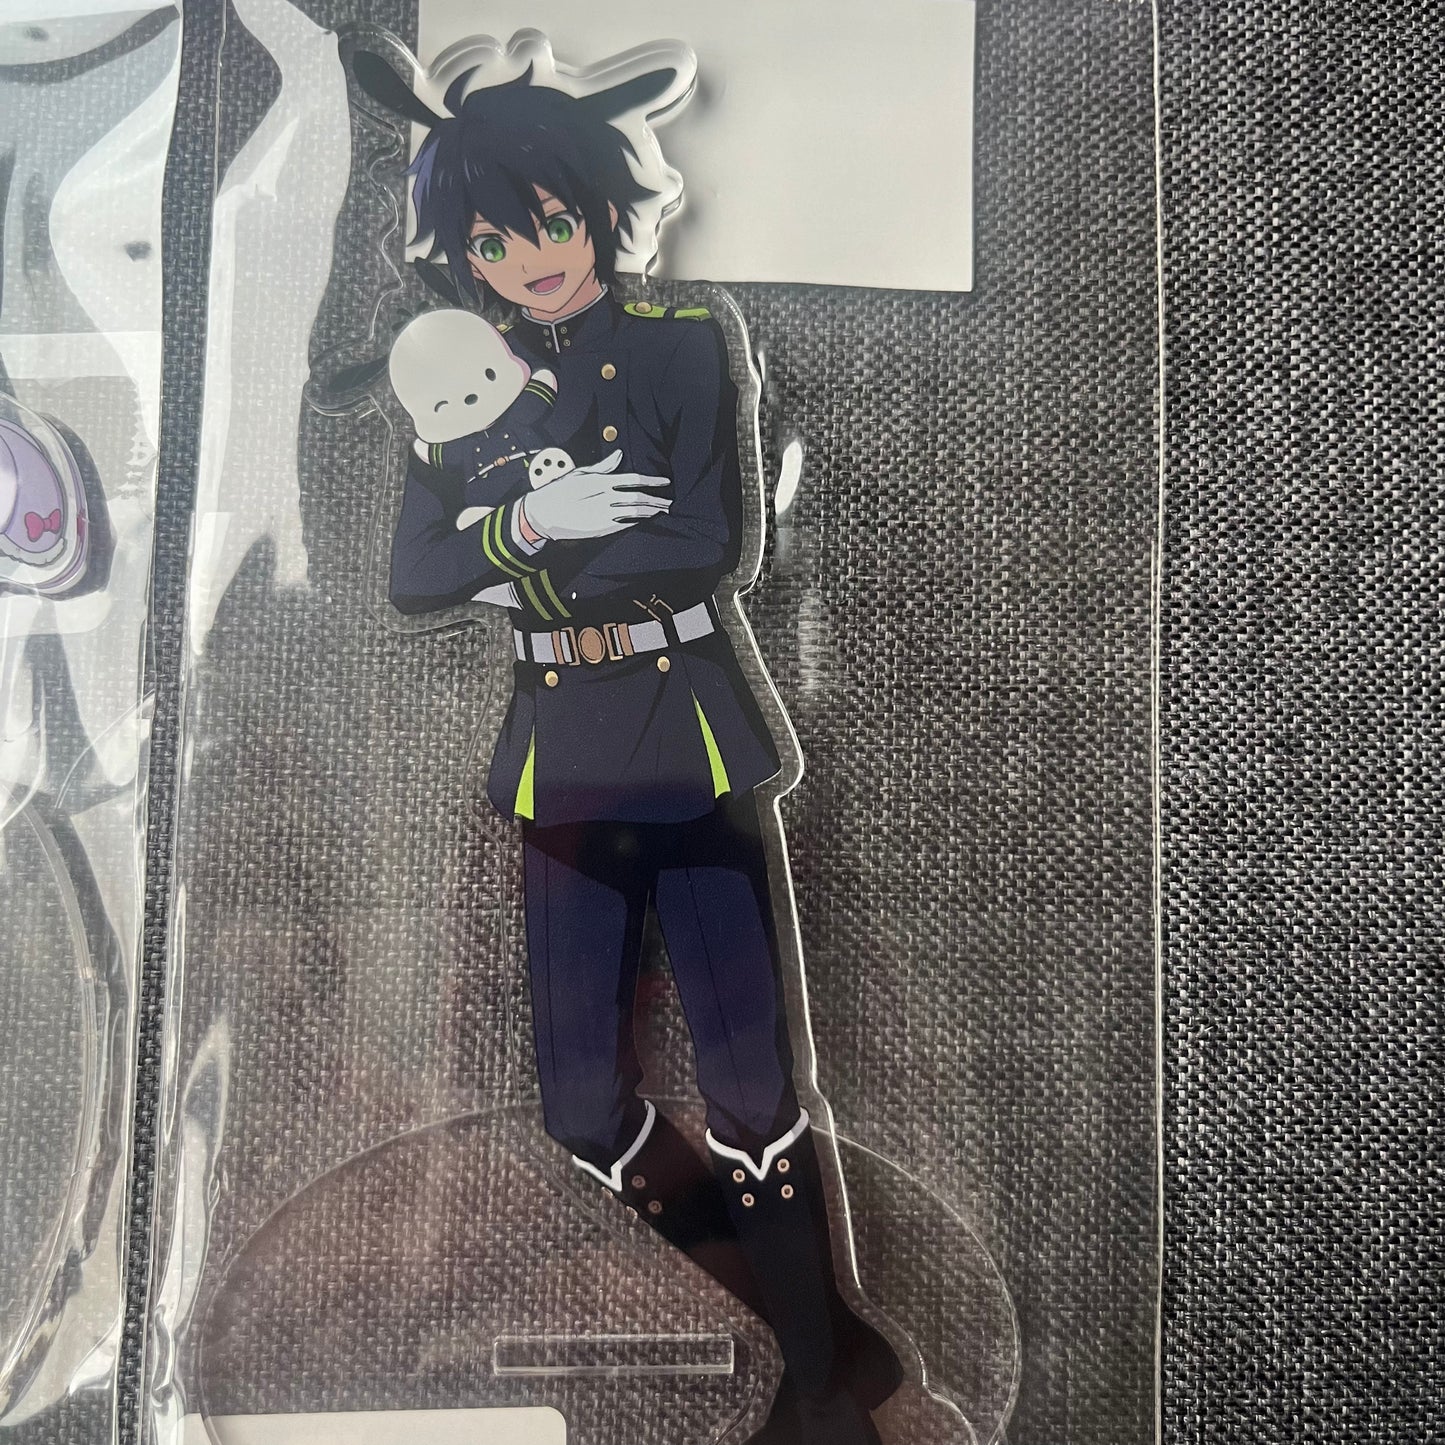 Seraph of the End x Sanrio Acrylic Standees